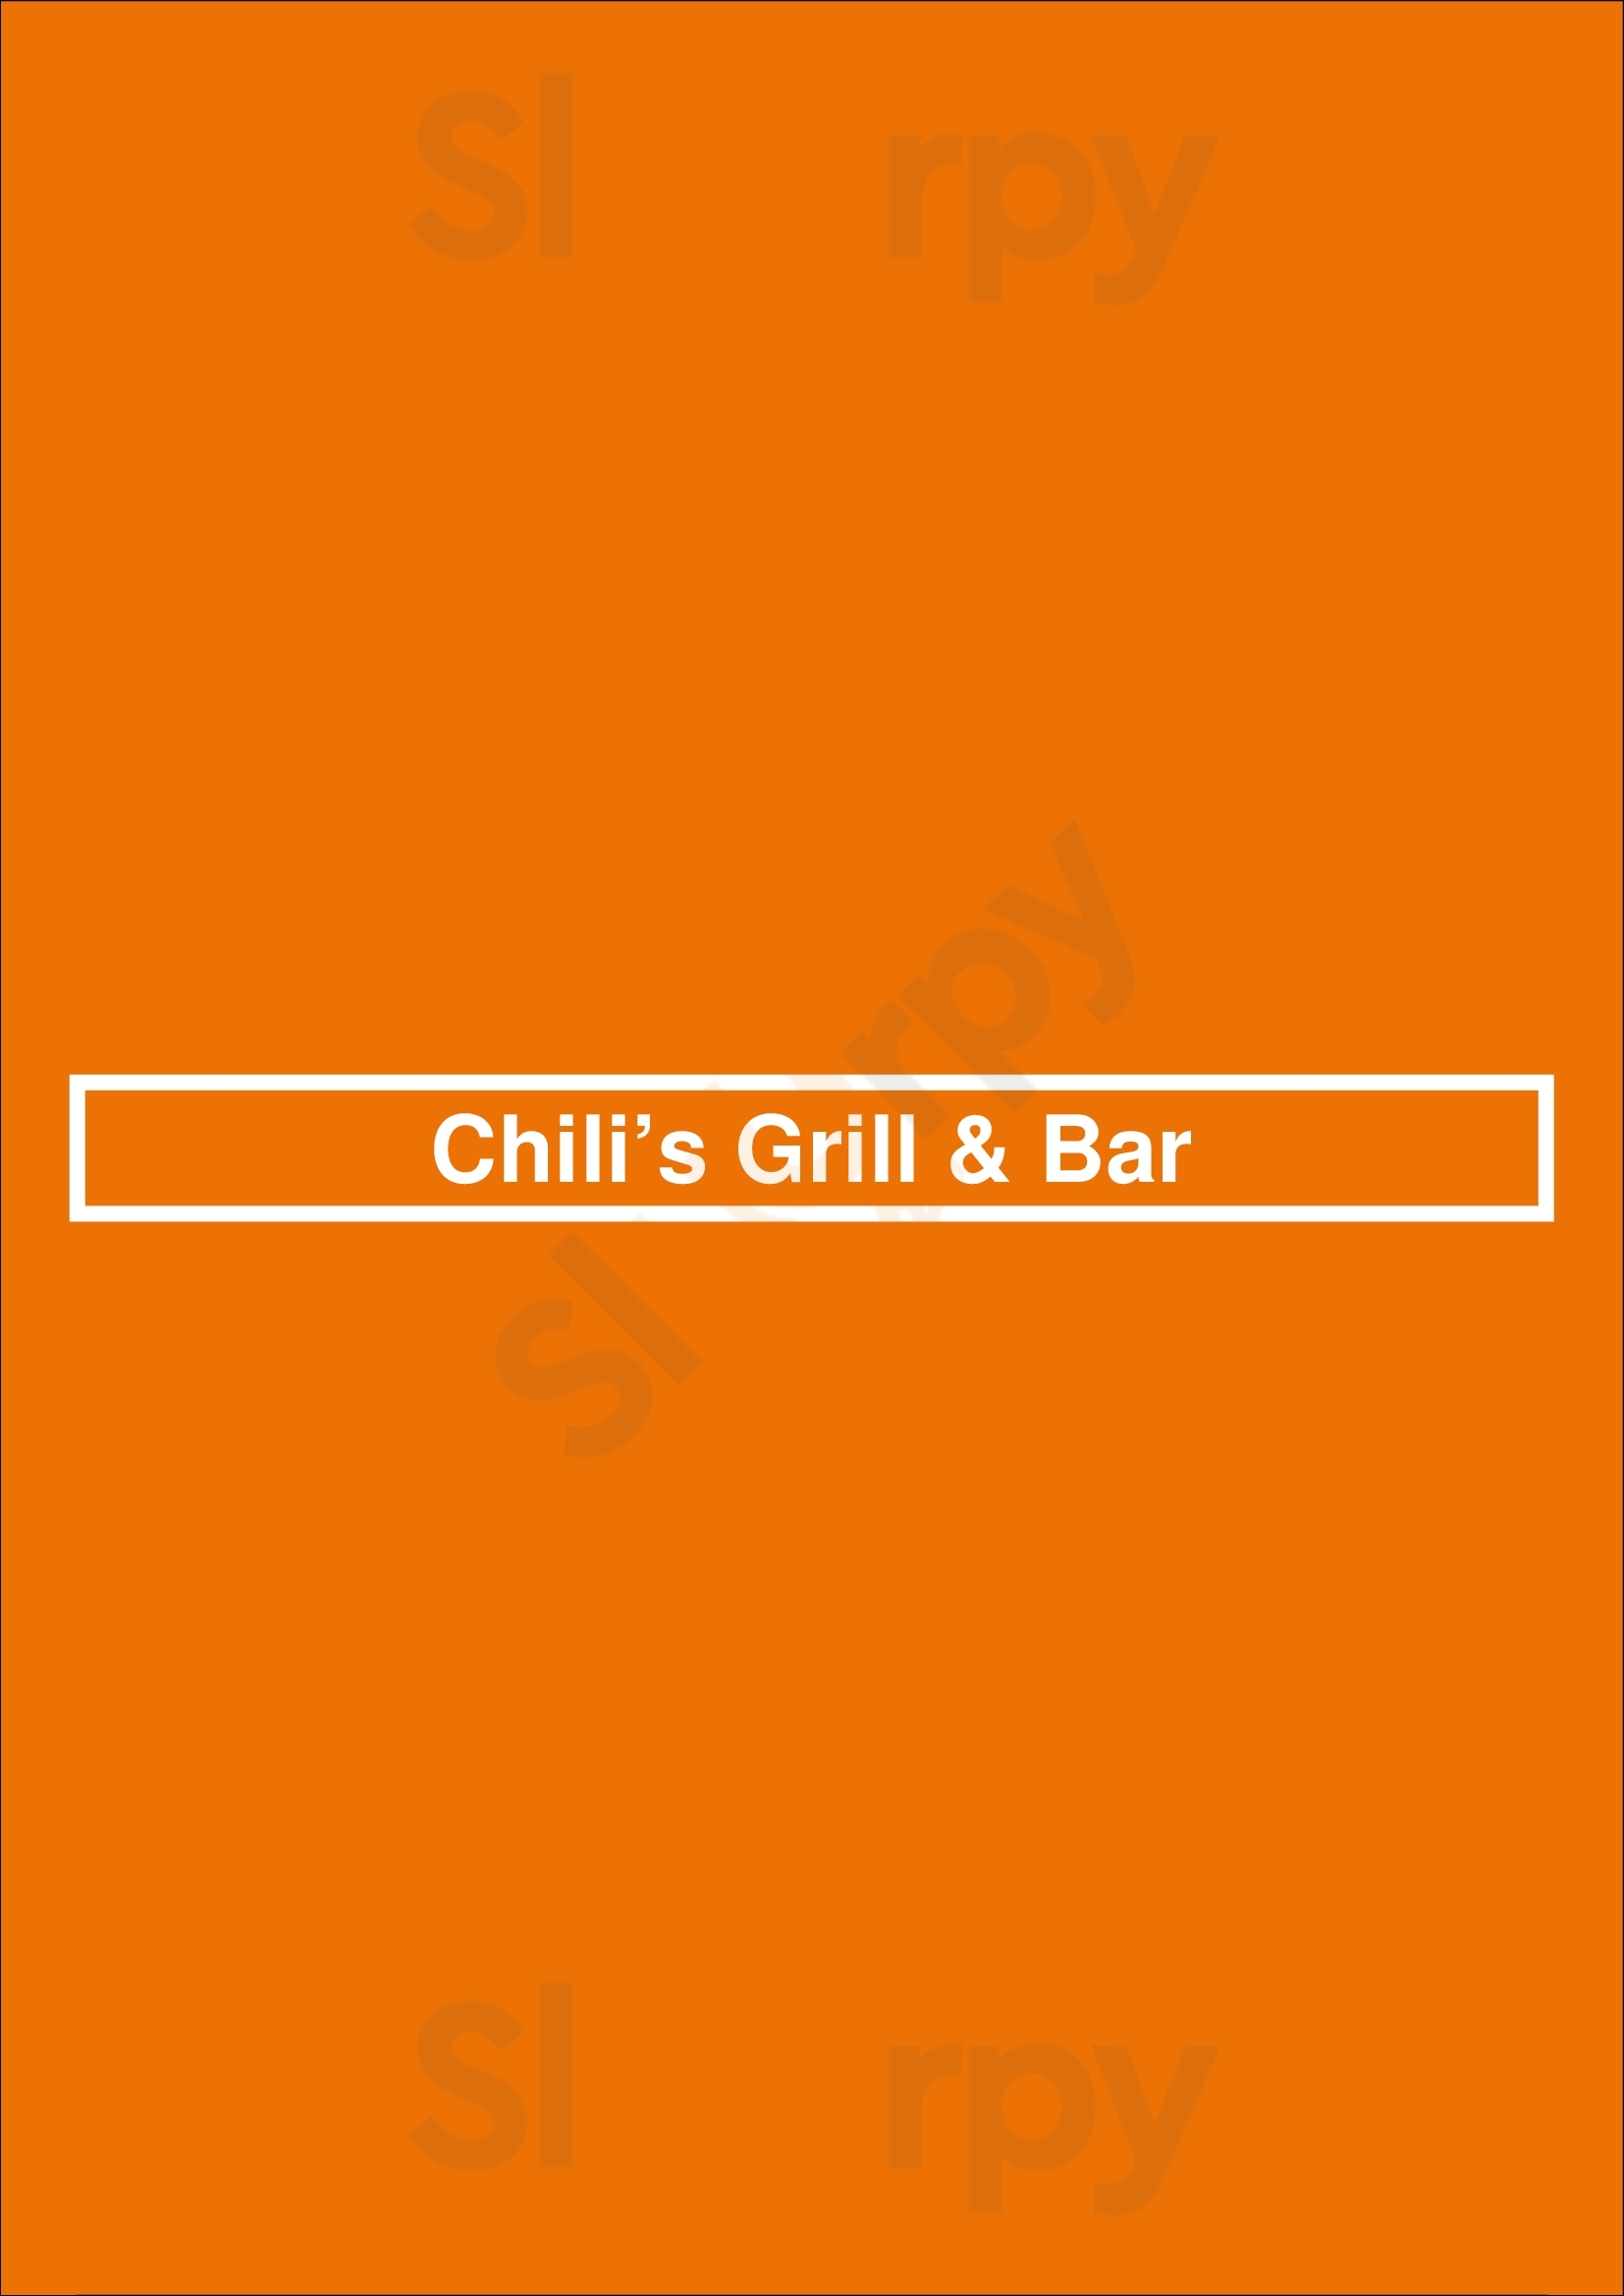 Chili’s Grill & Bar Fort Myers Menu - 1